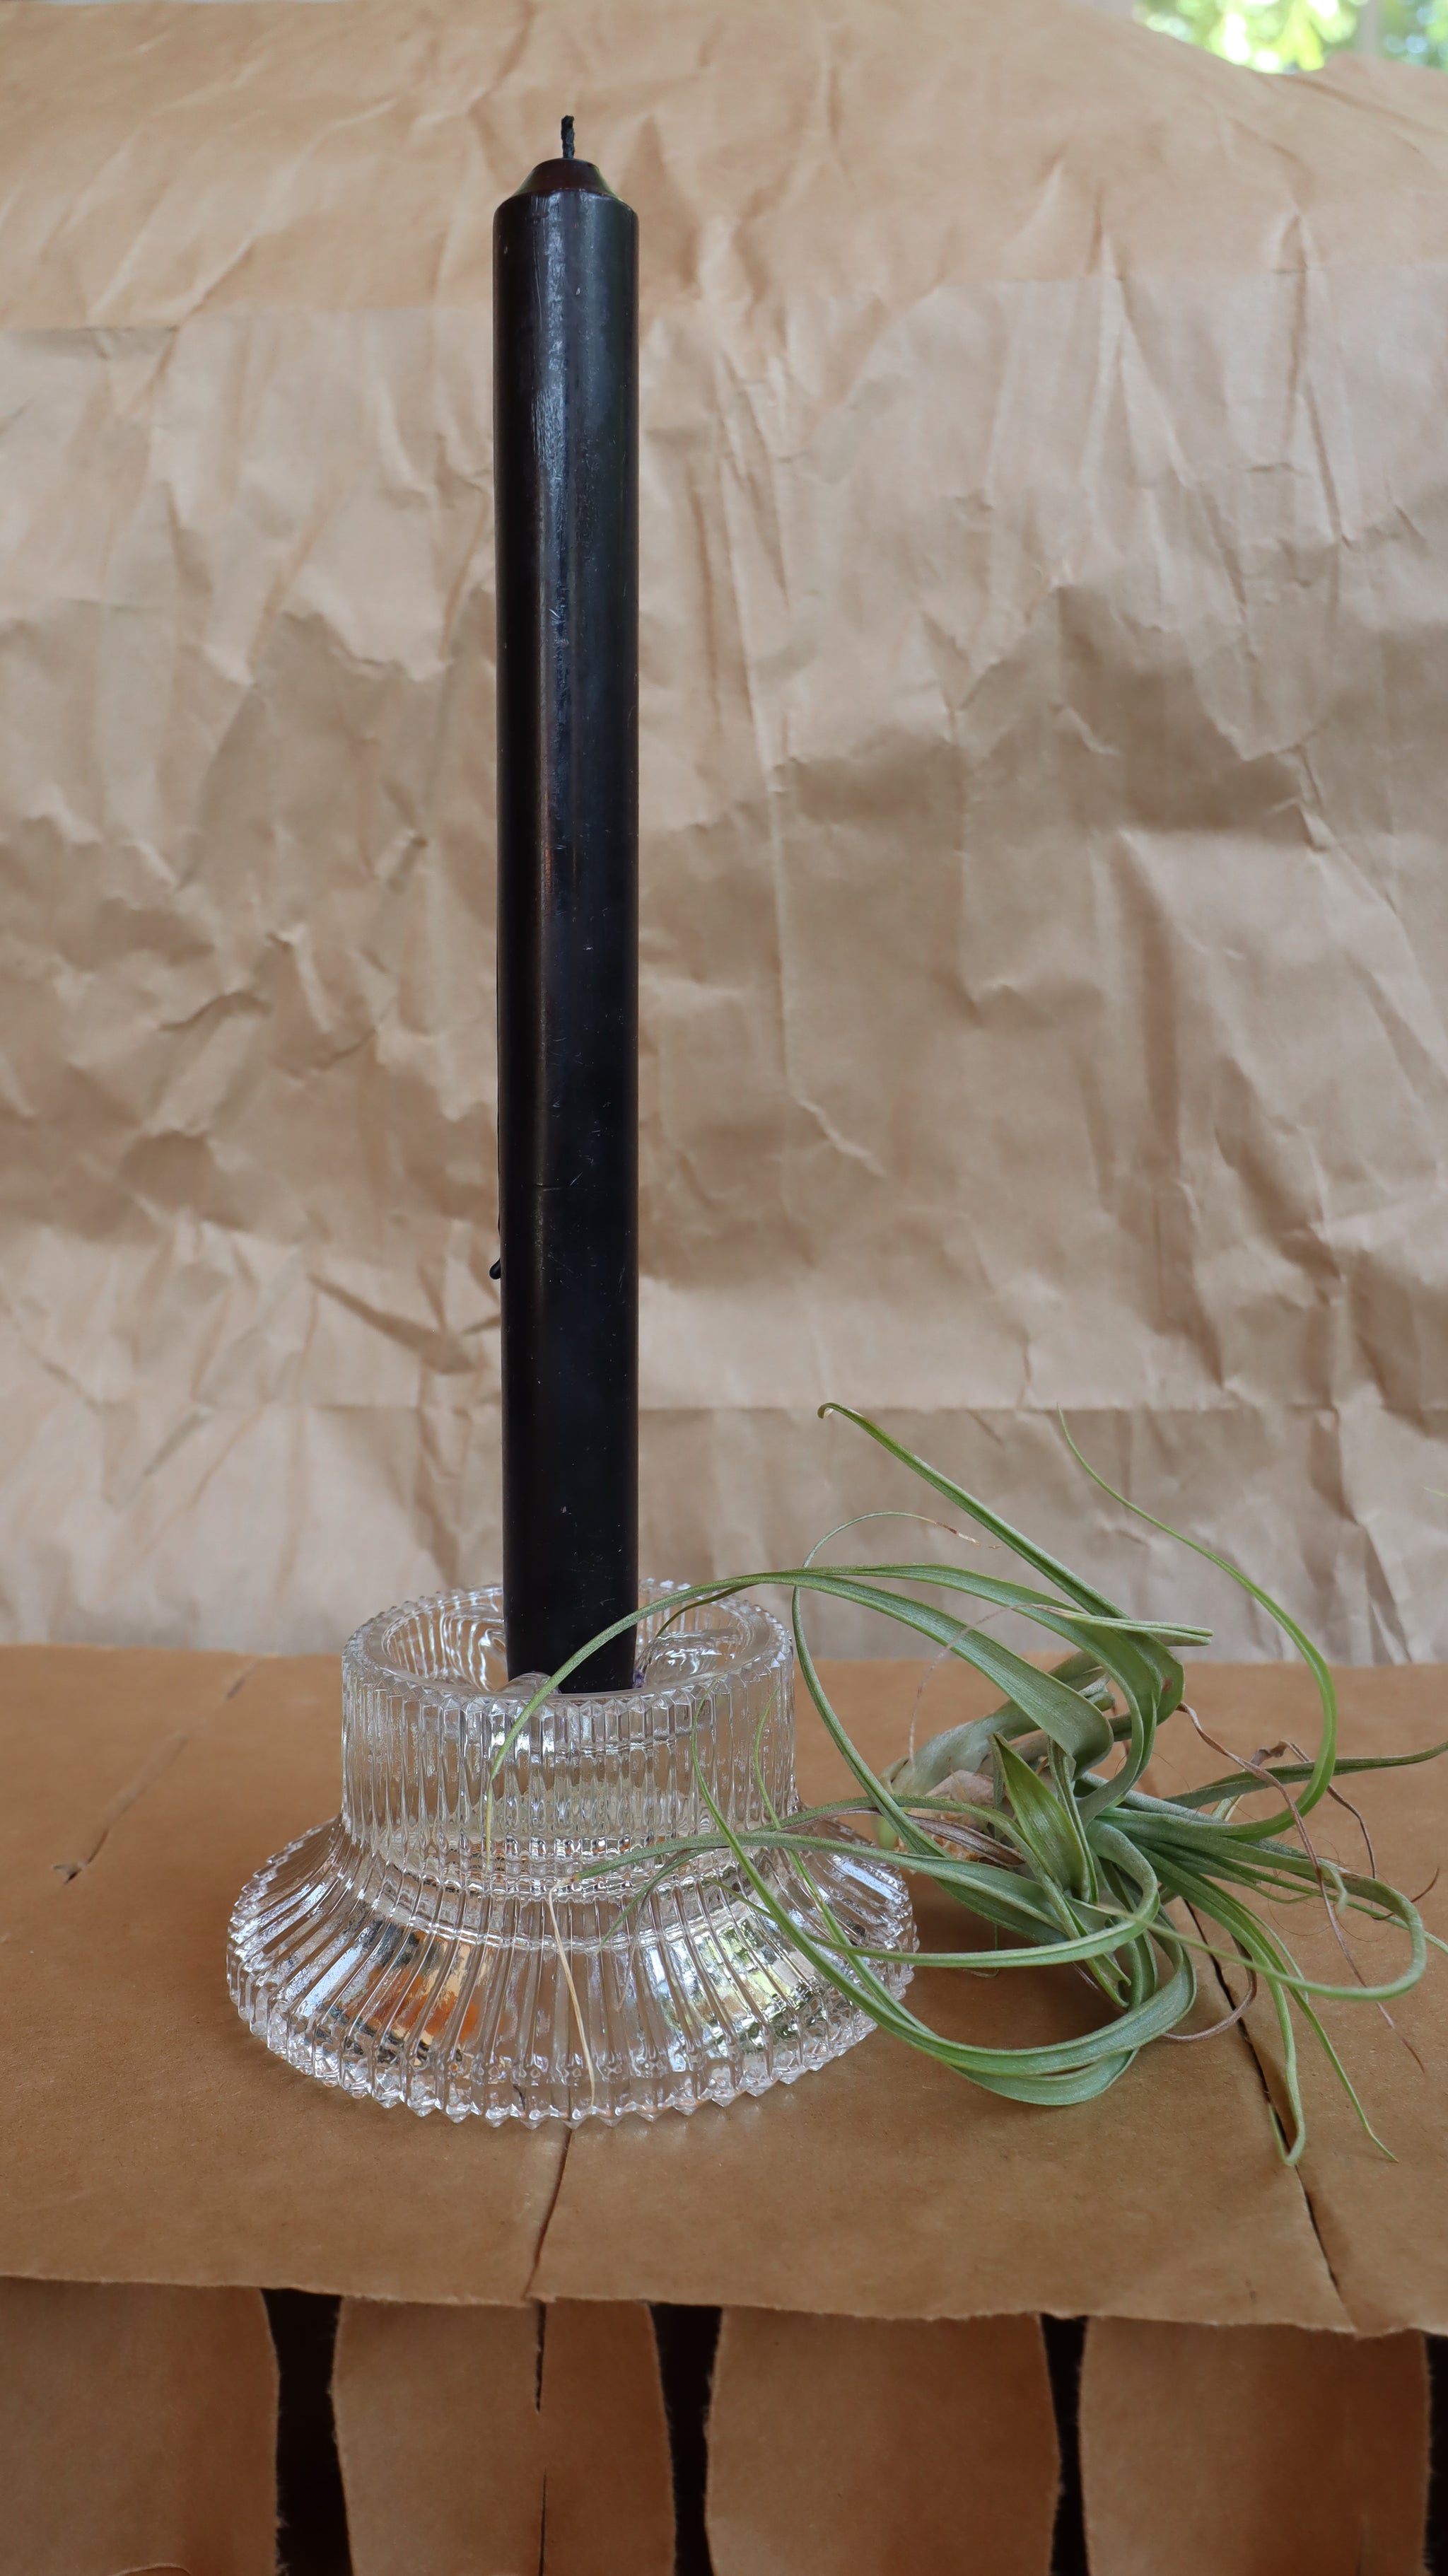 Vintage 1970s Indiana Glass Reflections Ribbed Reversible Candle Holder